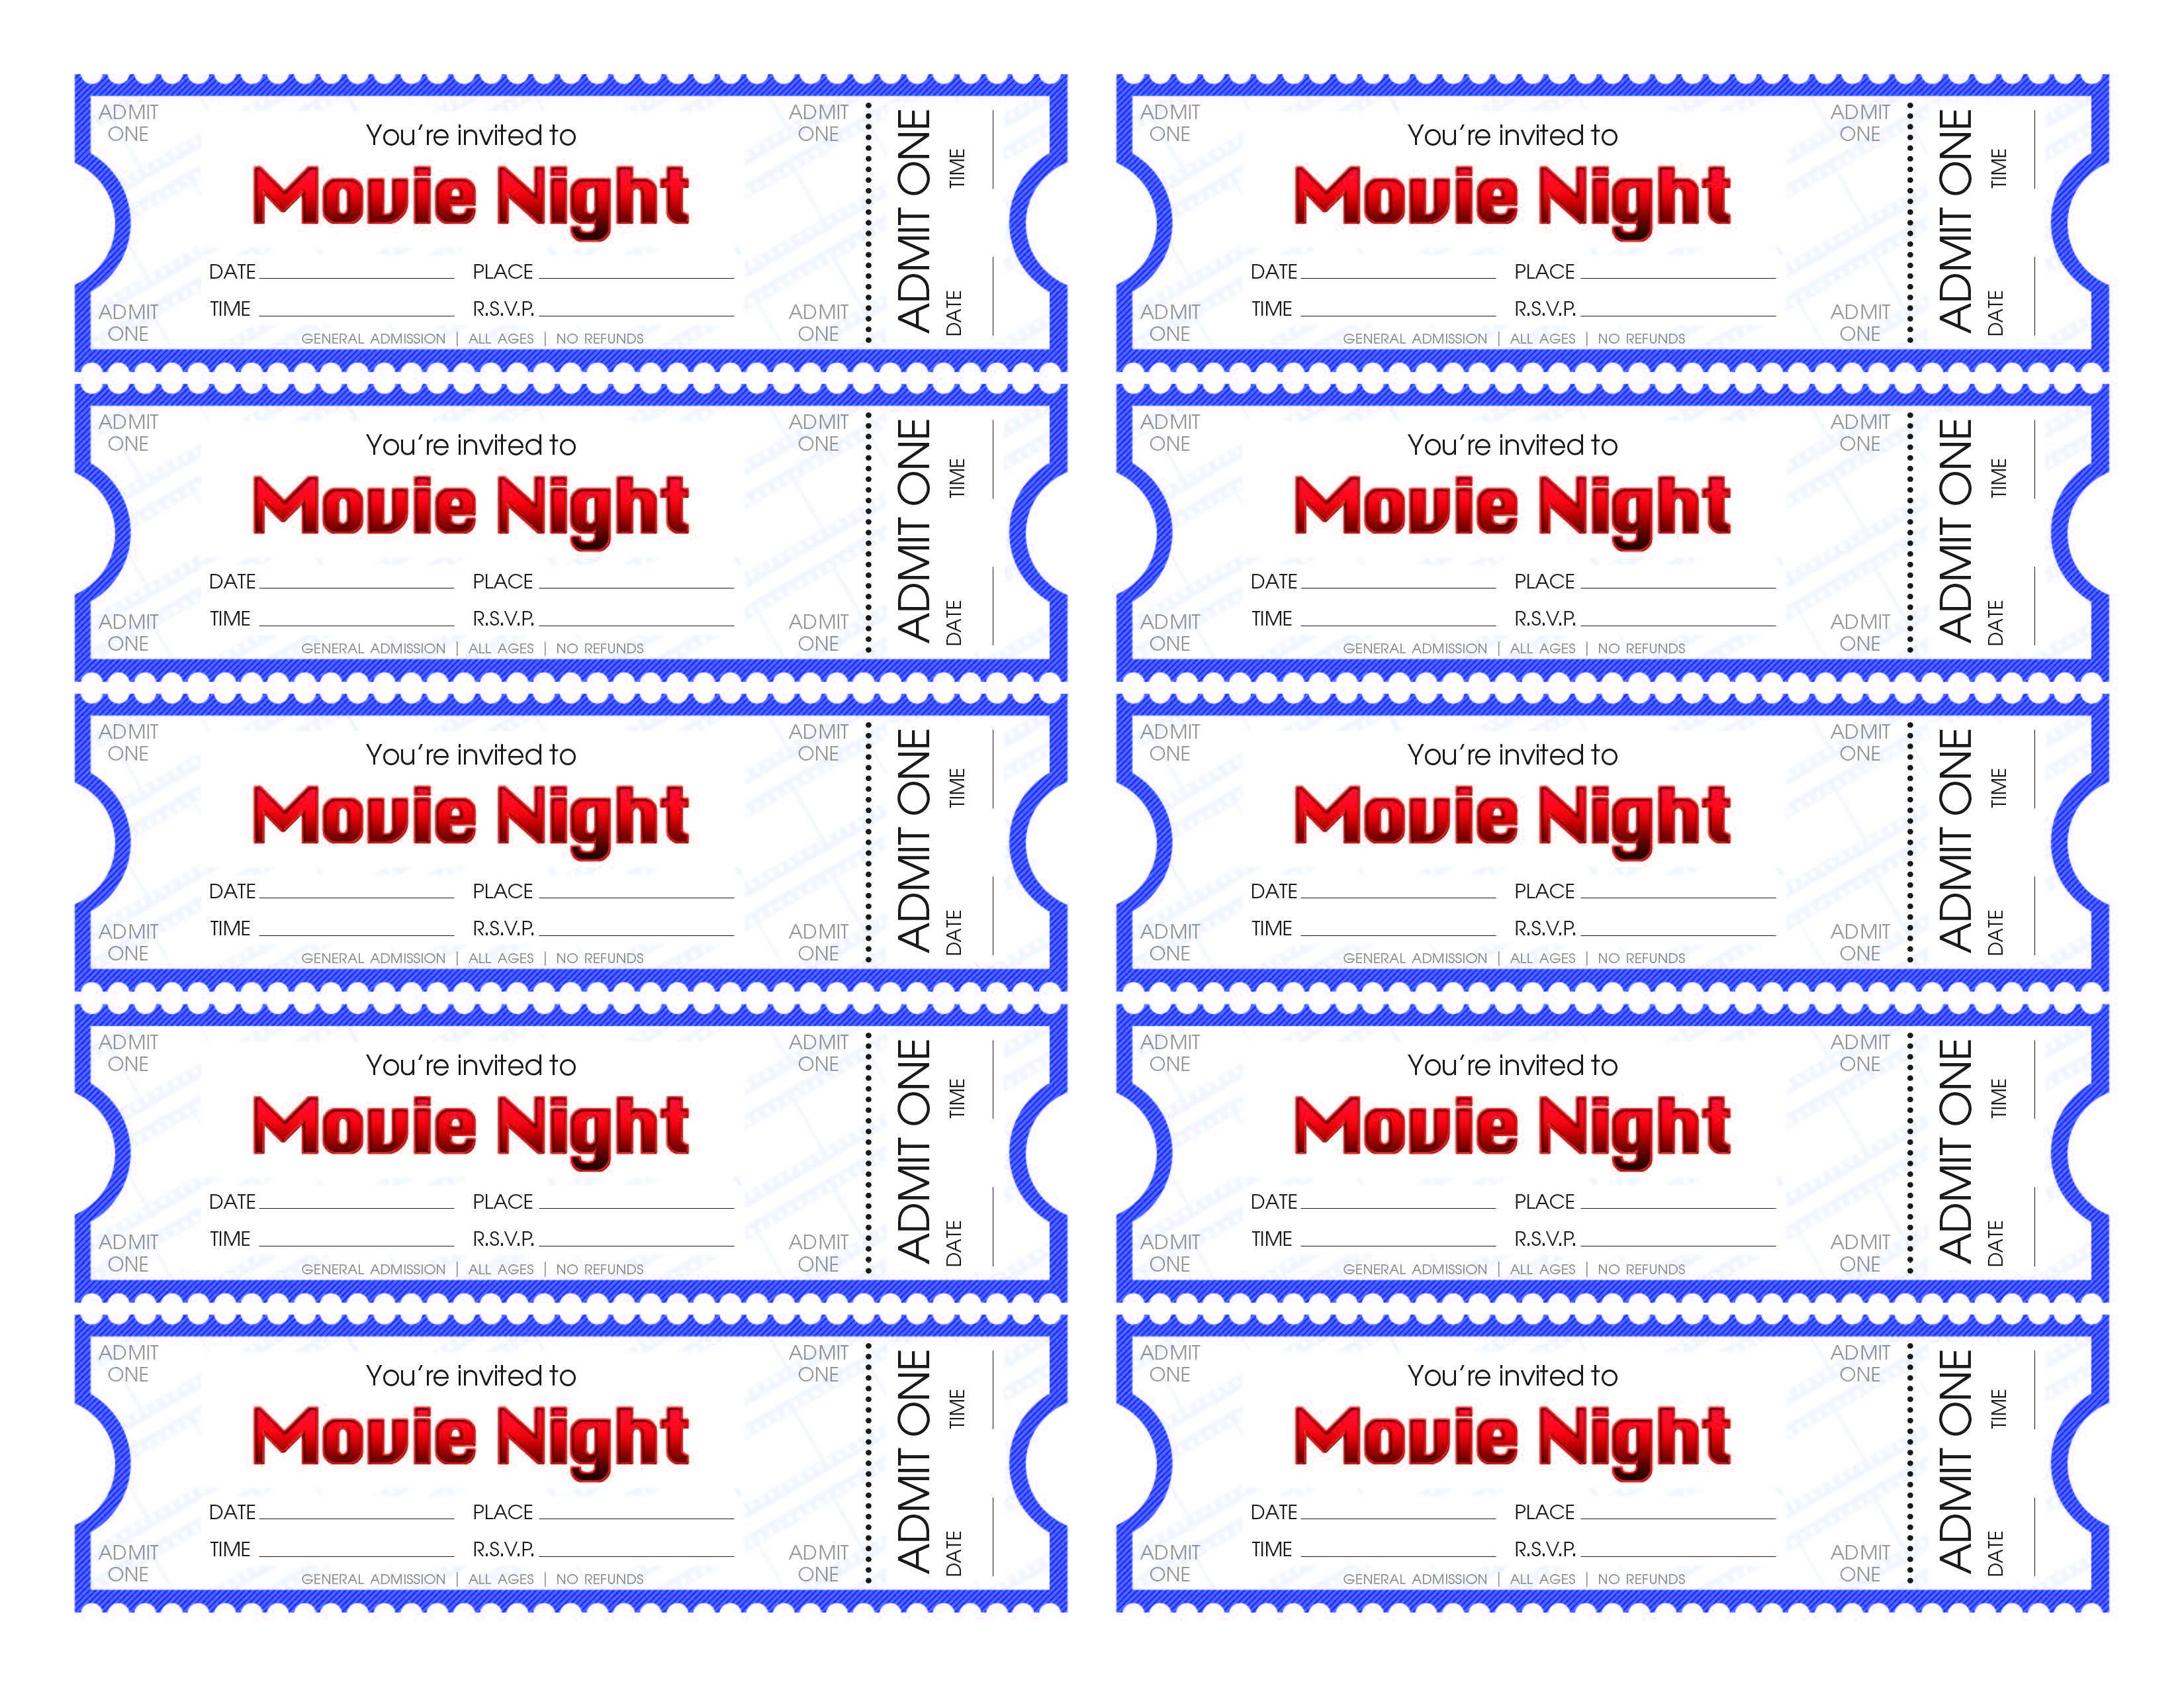 Make Your Own Movie Night Tickets – Sheknows - Make Your Own Tickets Free Printable